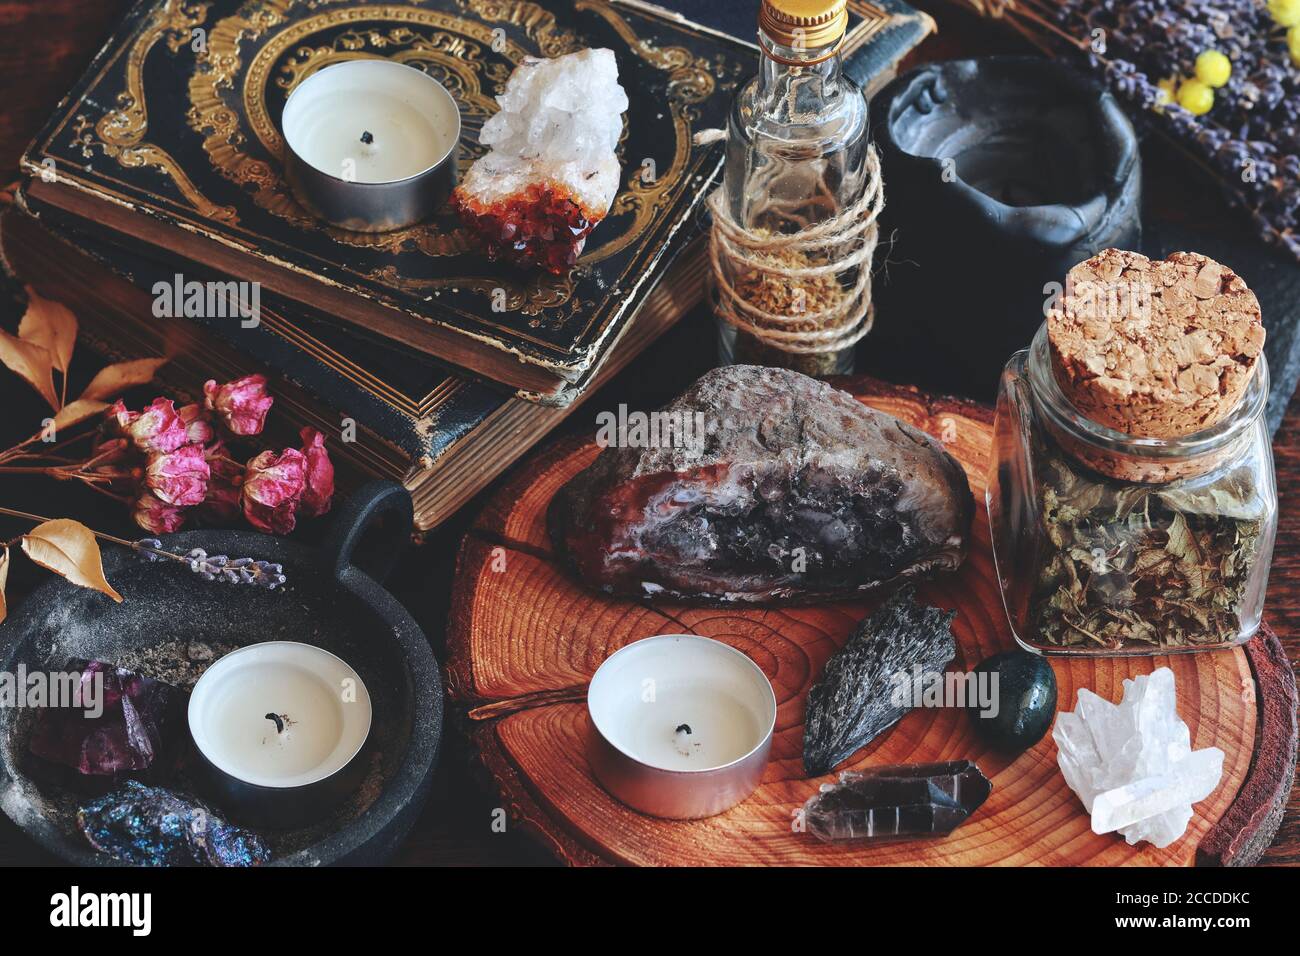 Different types of crystals on wiccan witch altar. Witchcraft themed dark photo with various crystals - kyanite, amethyst, peacock ore, smoky quartz Stock Photo